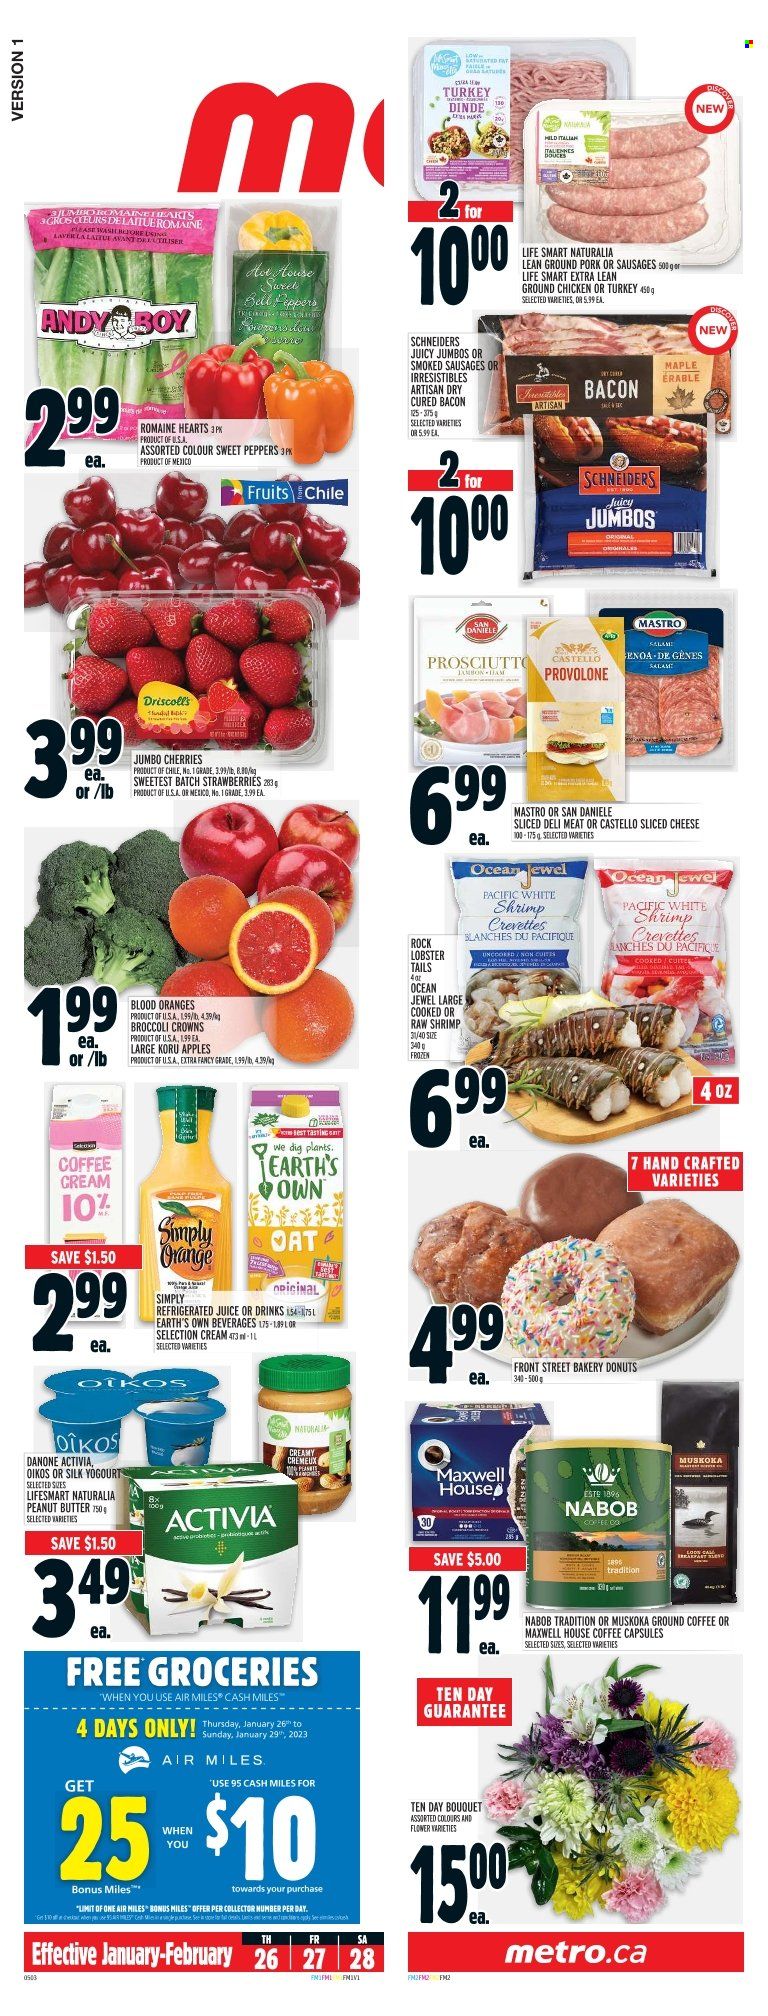 thumbnail - Metro Flyer - January 26, 2023 - February 01, 2023 - Sales products - donut, bell peppers, sweet peppers, peppers, apples, strawberries, cherries, lobster, lobster tail, shrimps, bacon, prosciutto, sausage, sliced cheese, cheese, Provolone, Activia, Oikos, Silk, oats, peanut butter, juice, Maxwell House, ground coffee, coffee capsules, L'Or, ground chicken, chicken, ground pork, bouquet, Danone. Page 13.